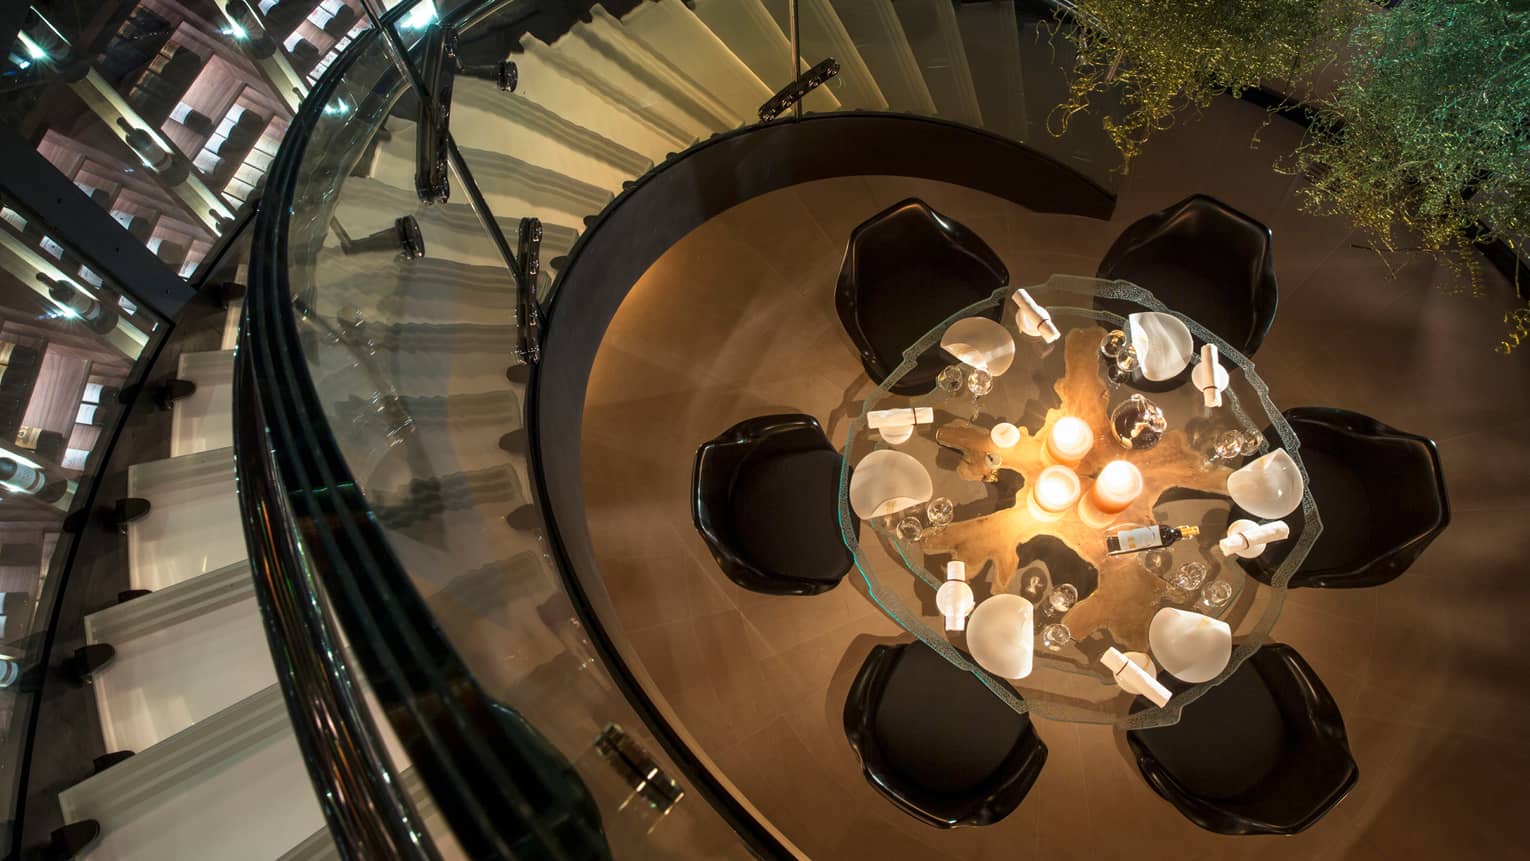 Aerial view of round glass candle-lit dining table, chairs from spiral staircase